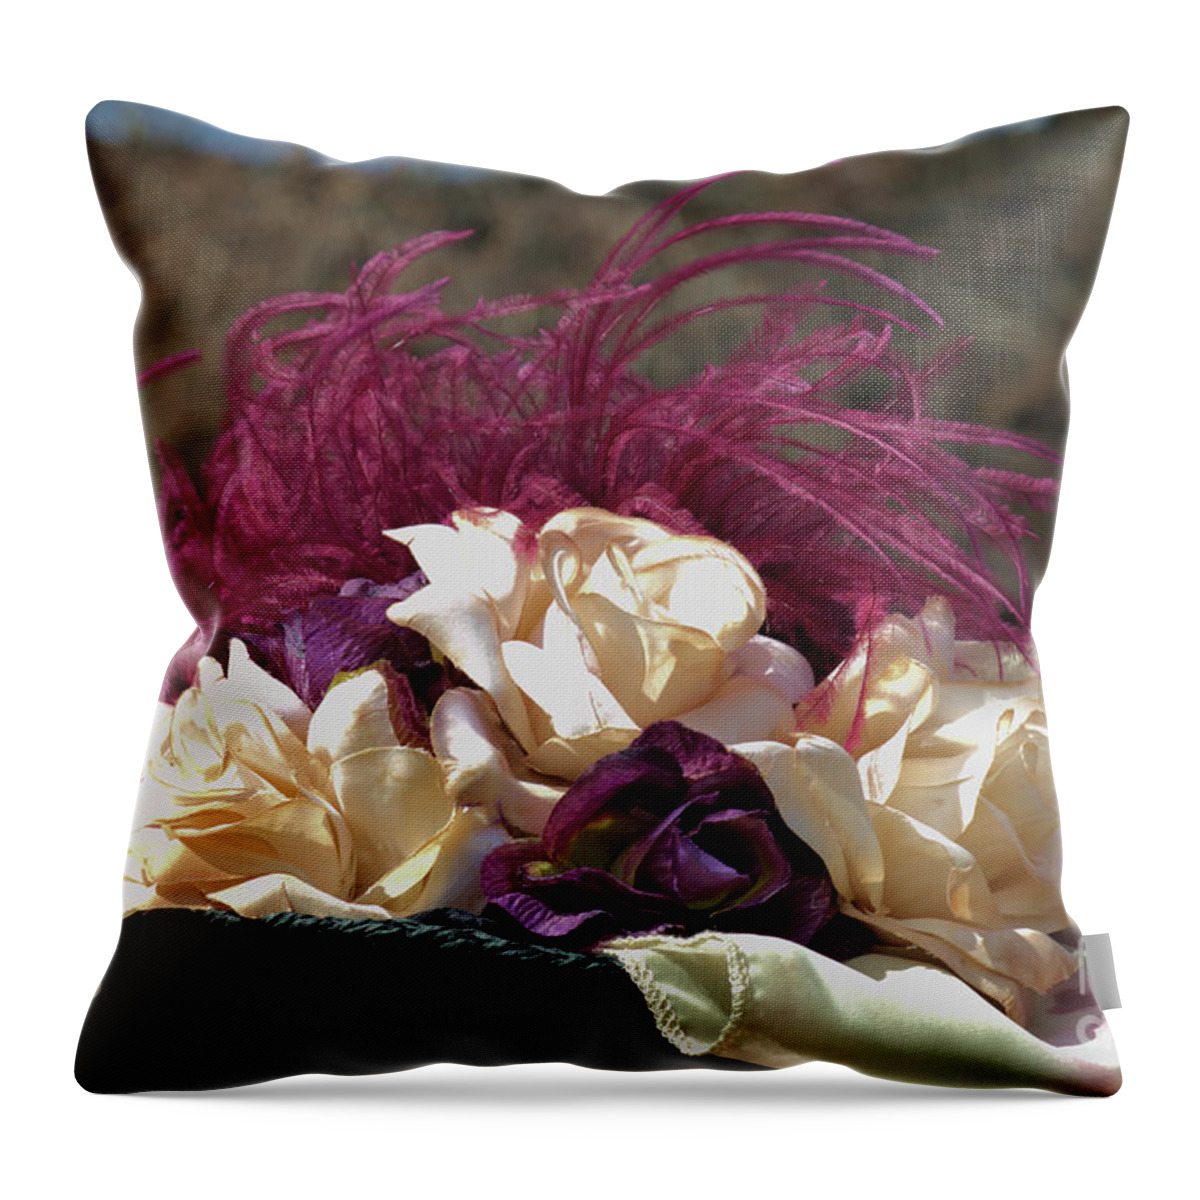 Hat Throw Pillow featuring the photograph Vintage Hat With Fabric Roses by Kae Cheatham